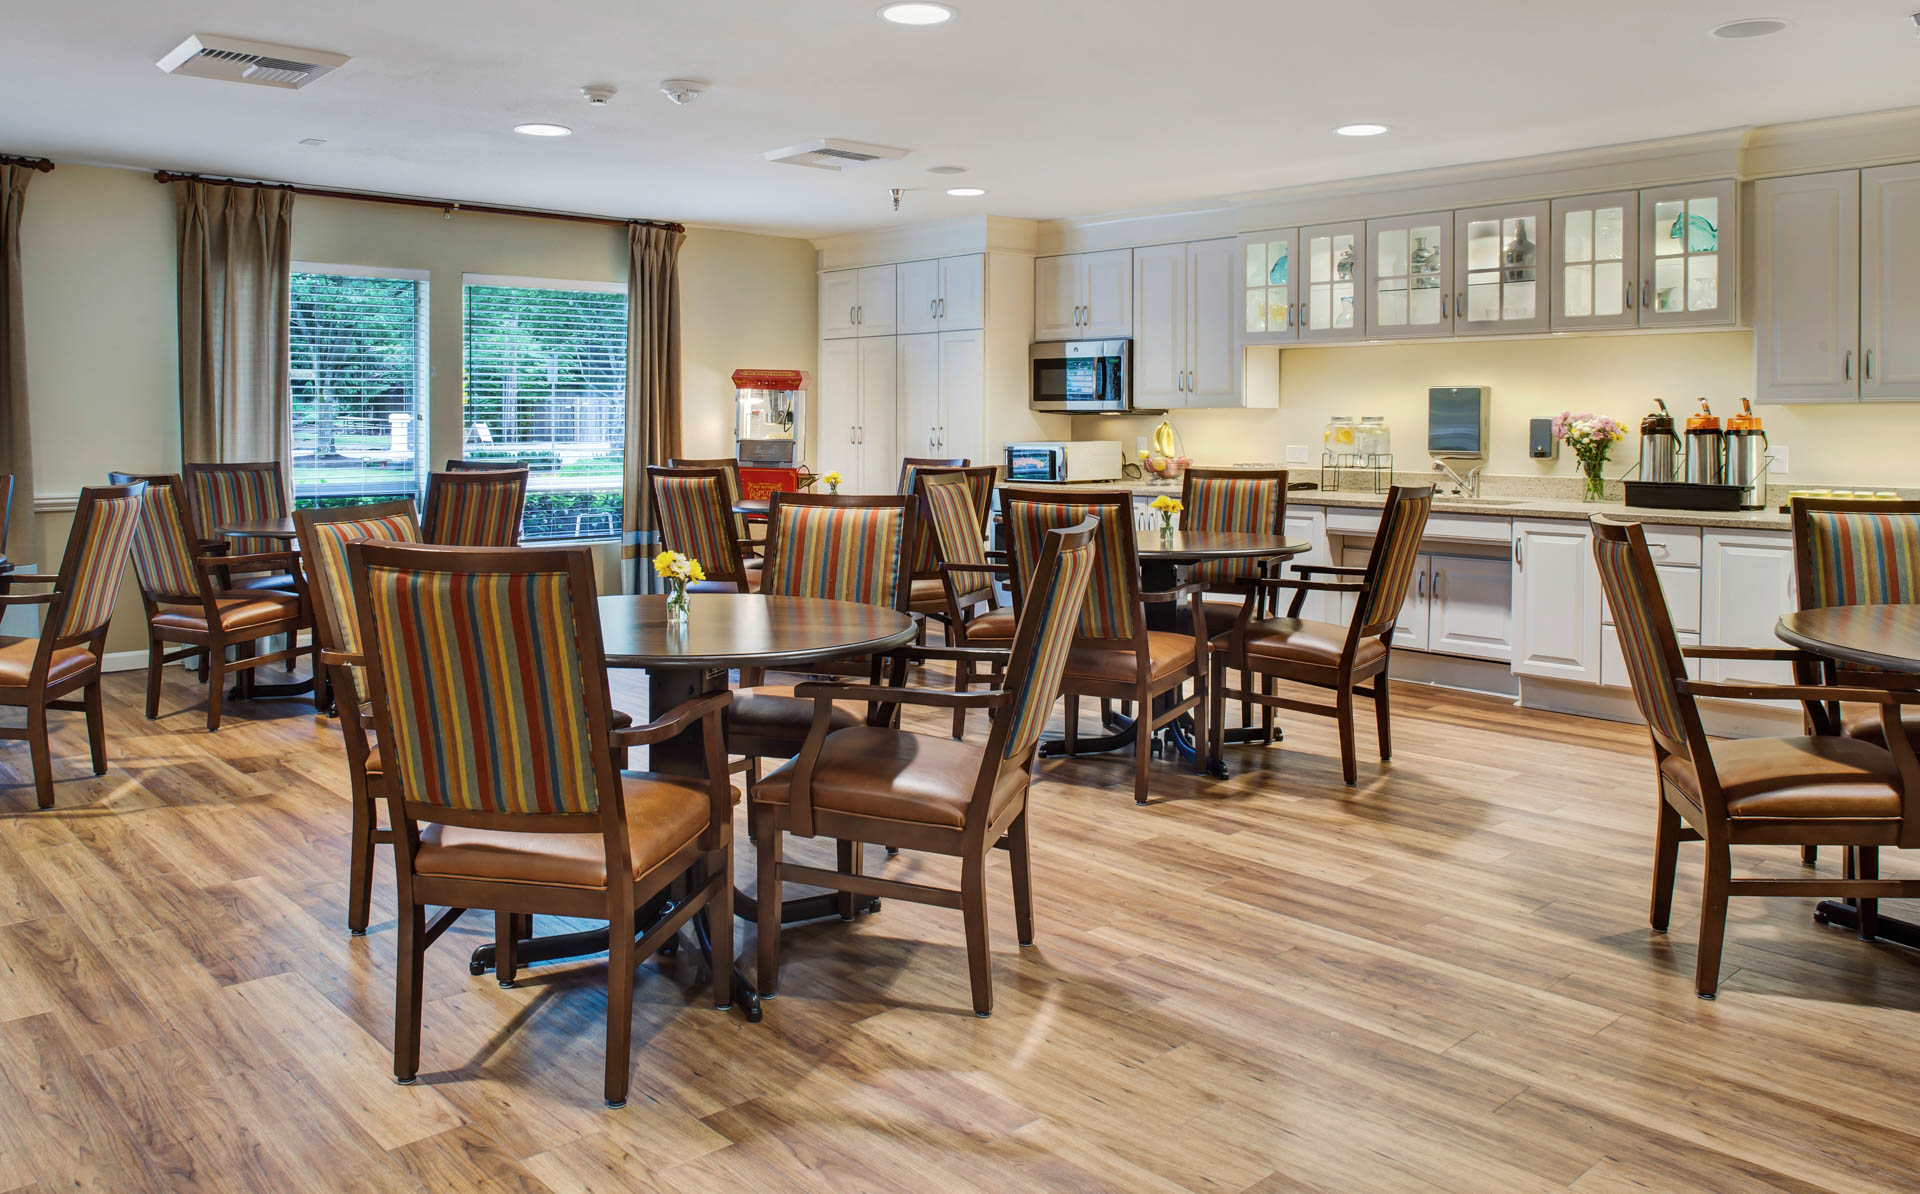 Dining room with tables and chairs at Cogir of San Rafael Memory Care, San Rafael